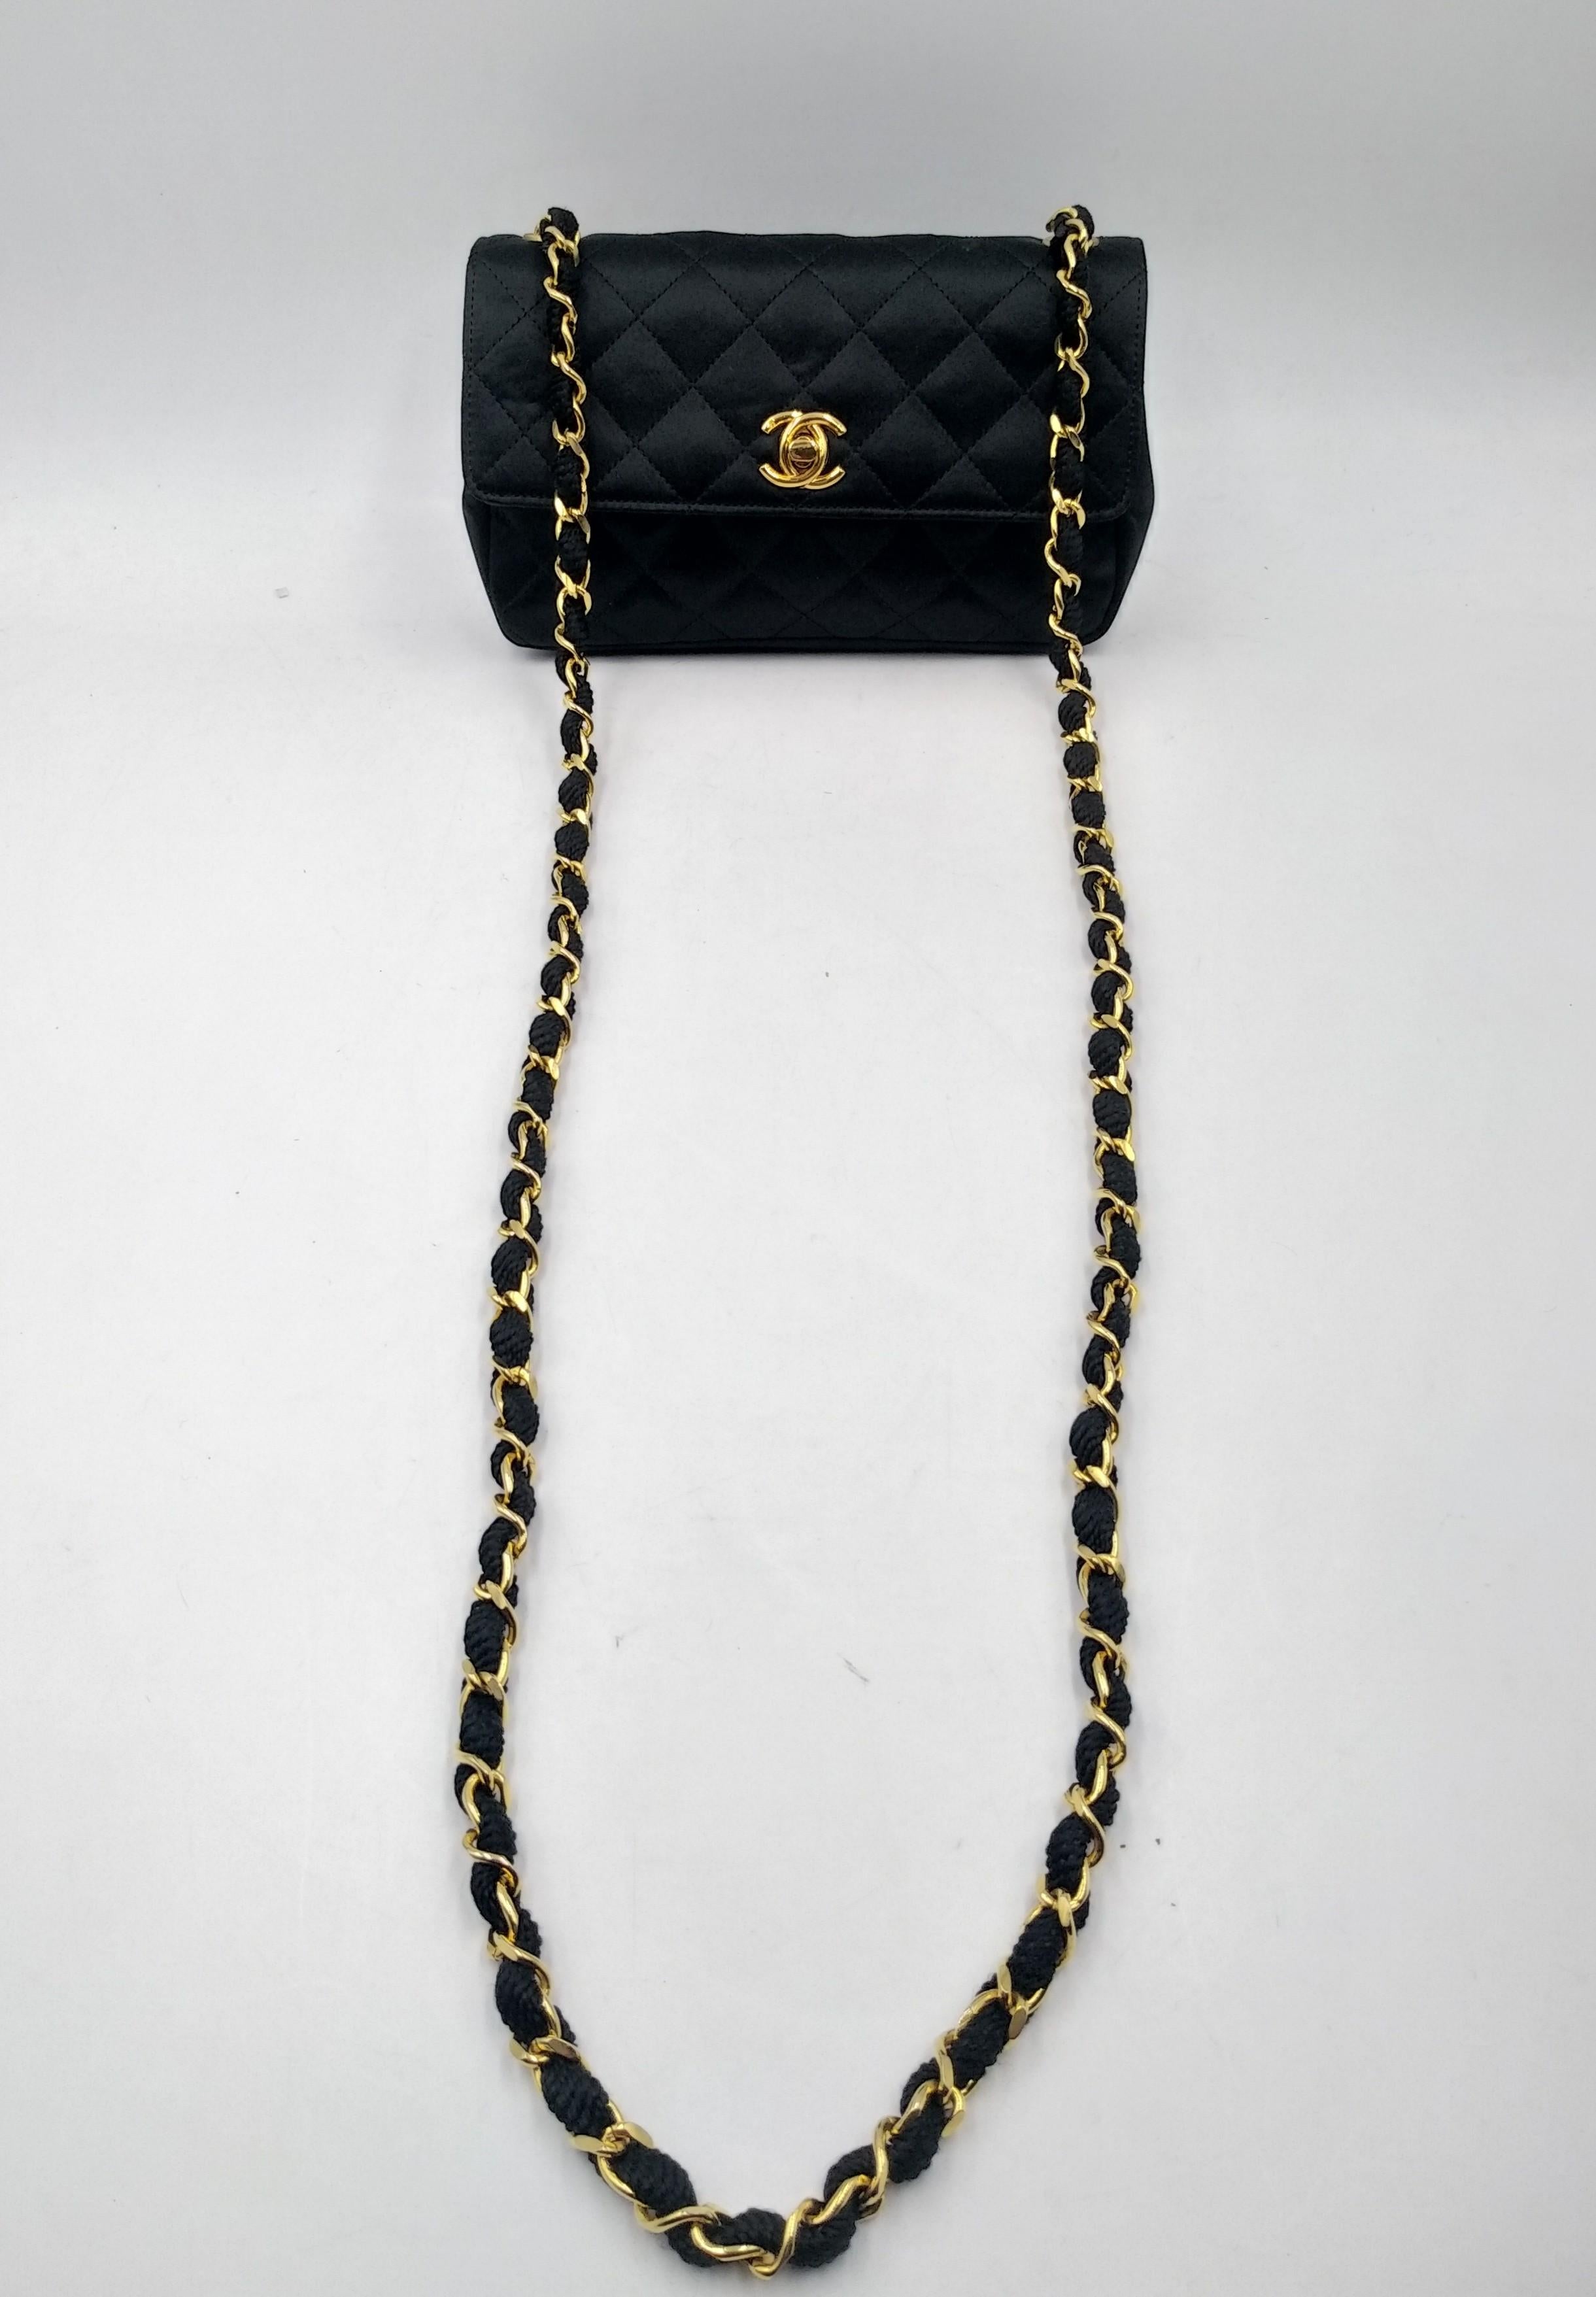 Chanel Black Quilted Satin Mini Flap Bag with Gold Hardware For Sale 4